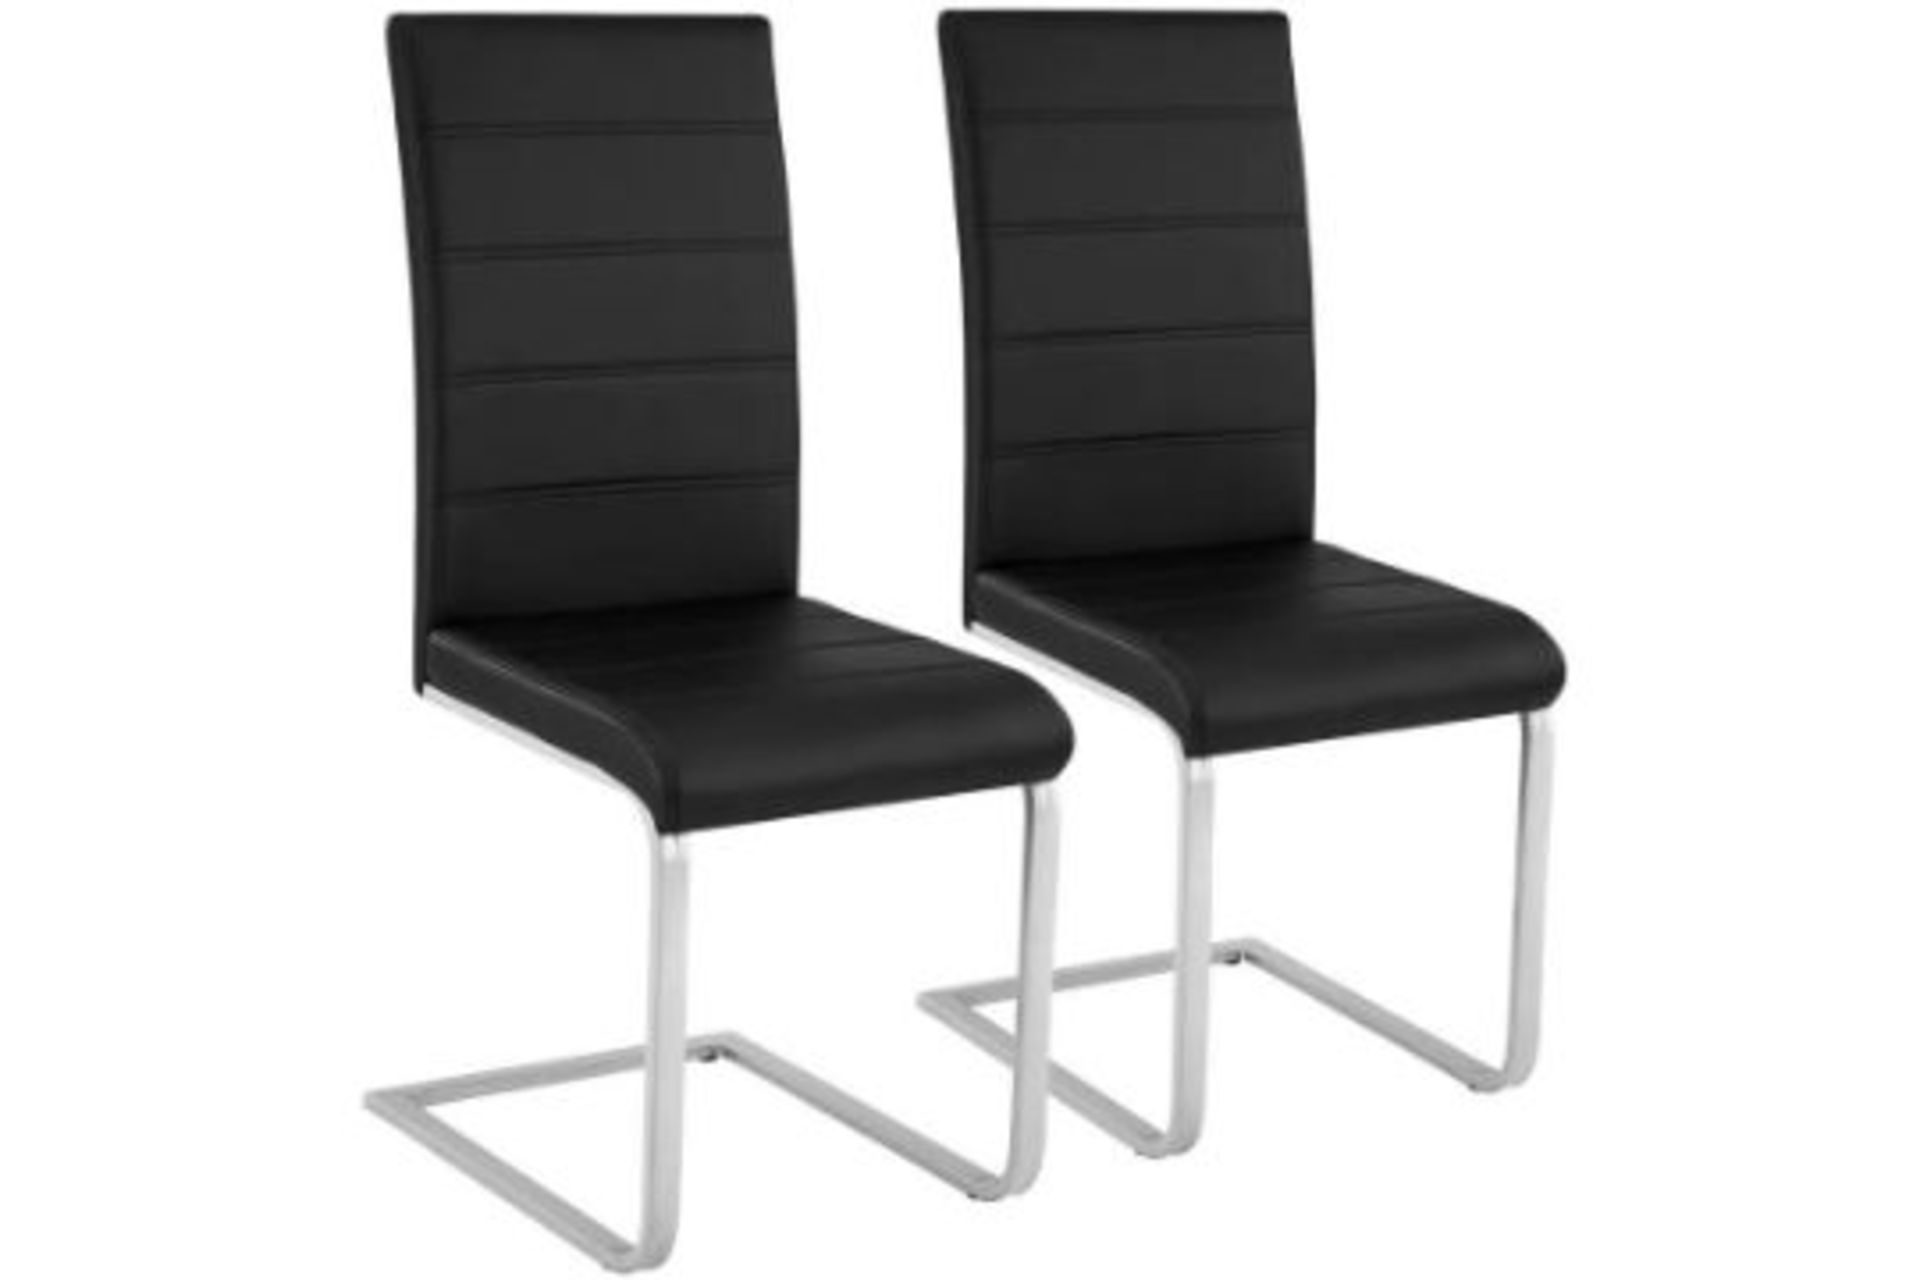 Cantilevered Dining Chairs | Set of 2 black. - R13A.8. RRP £172.00. With this set of 2 dining room